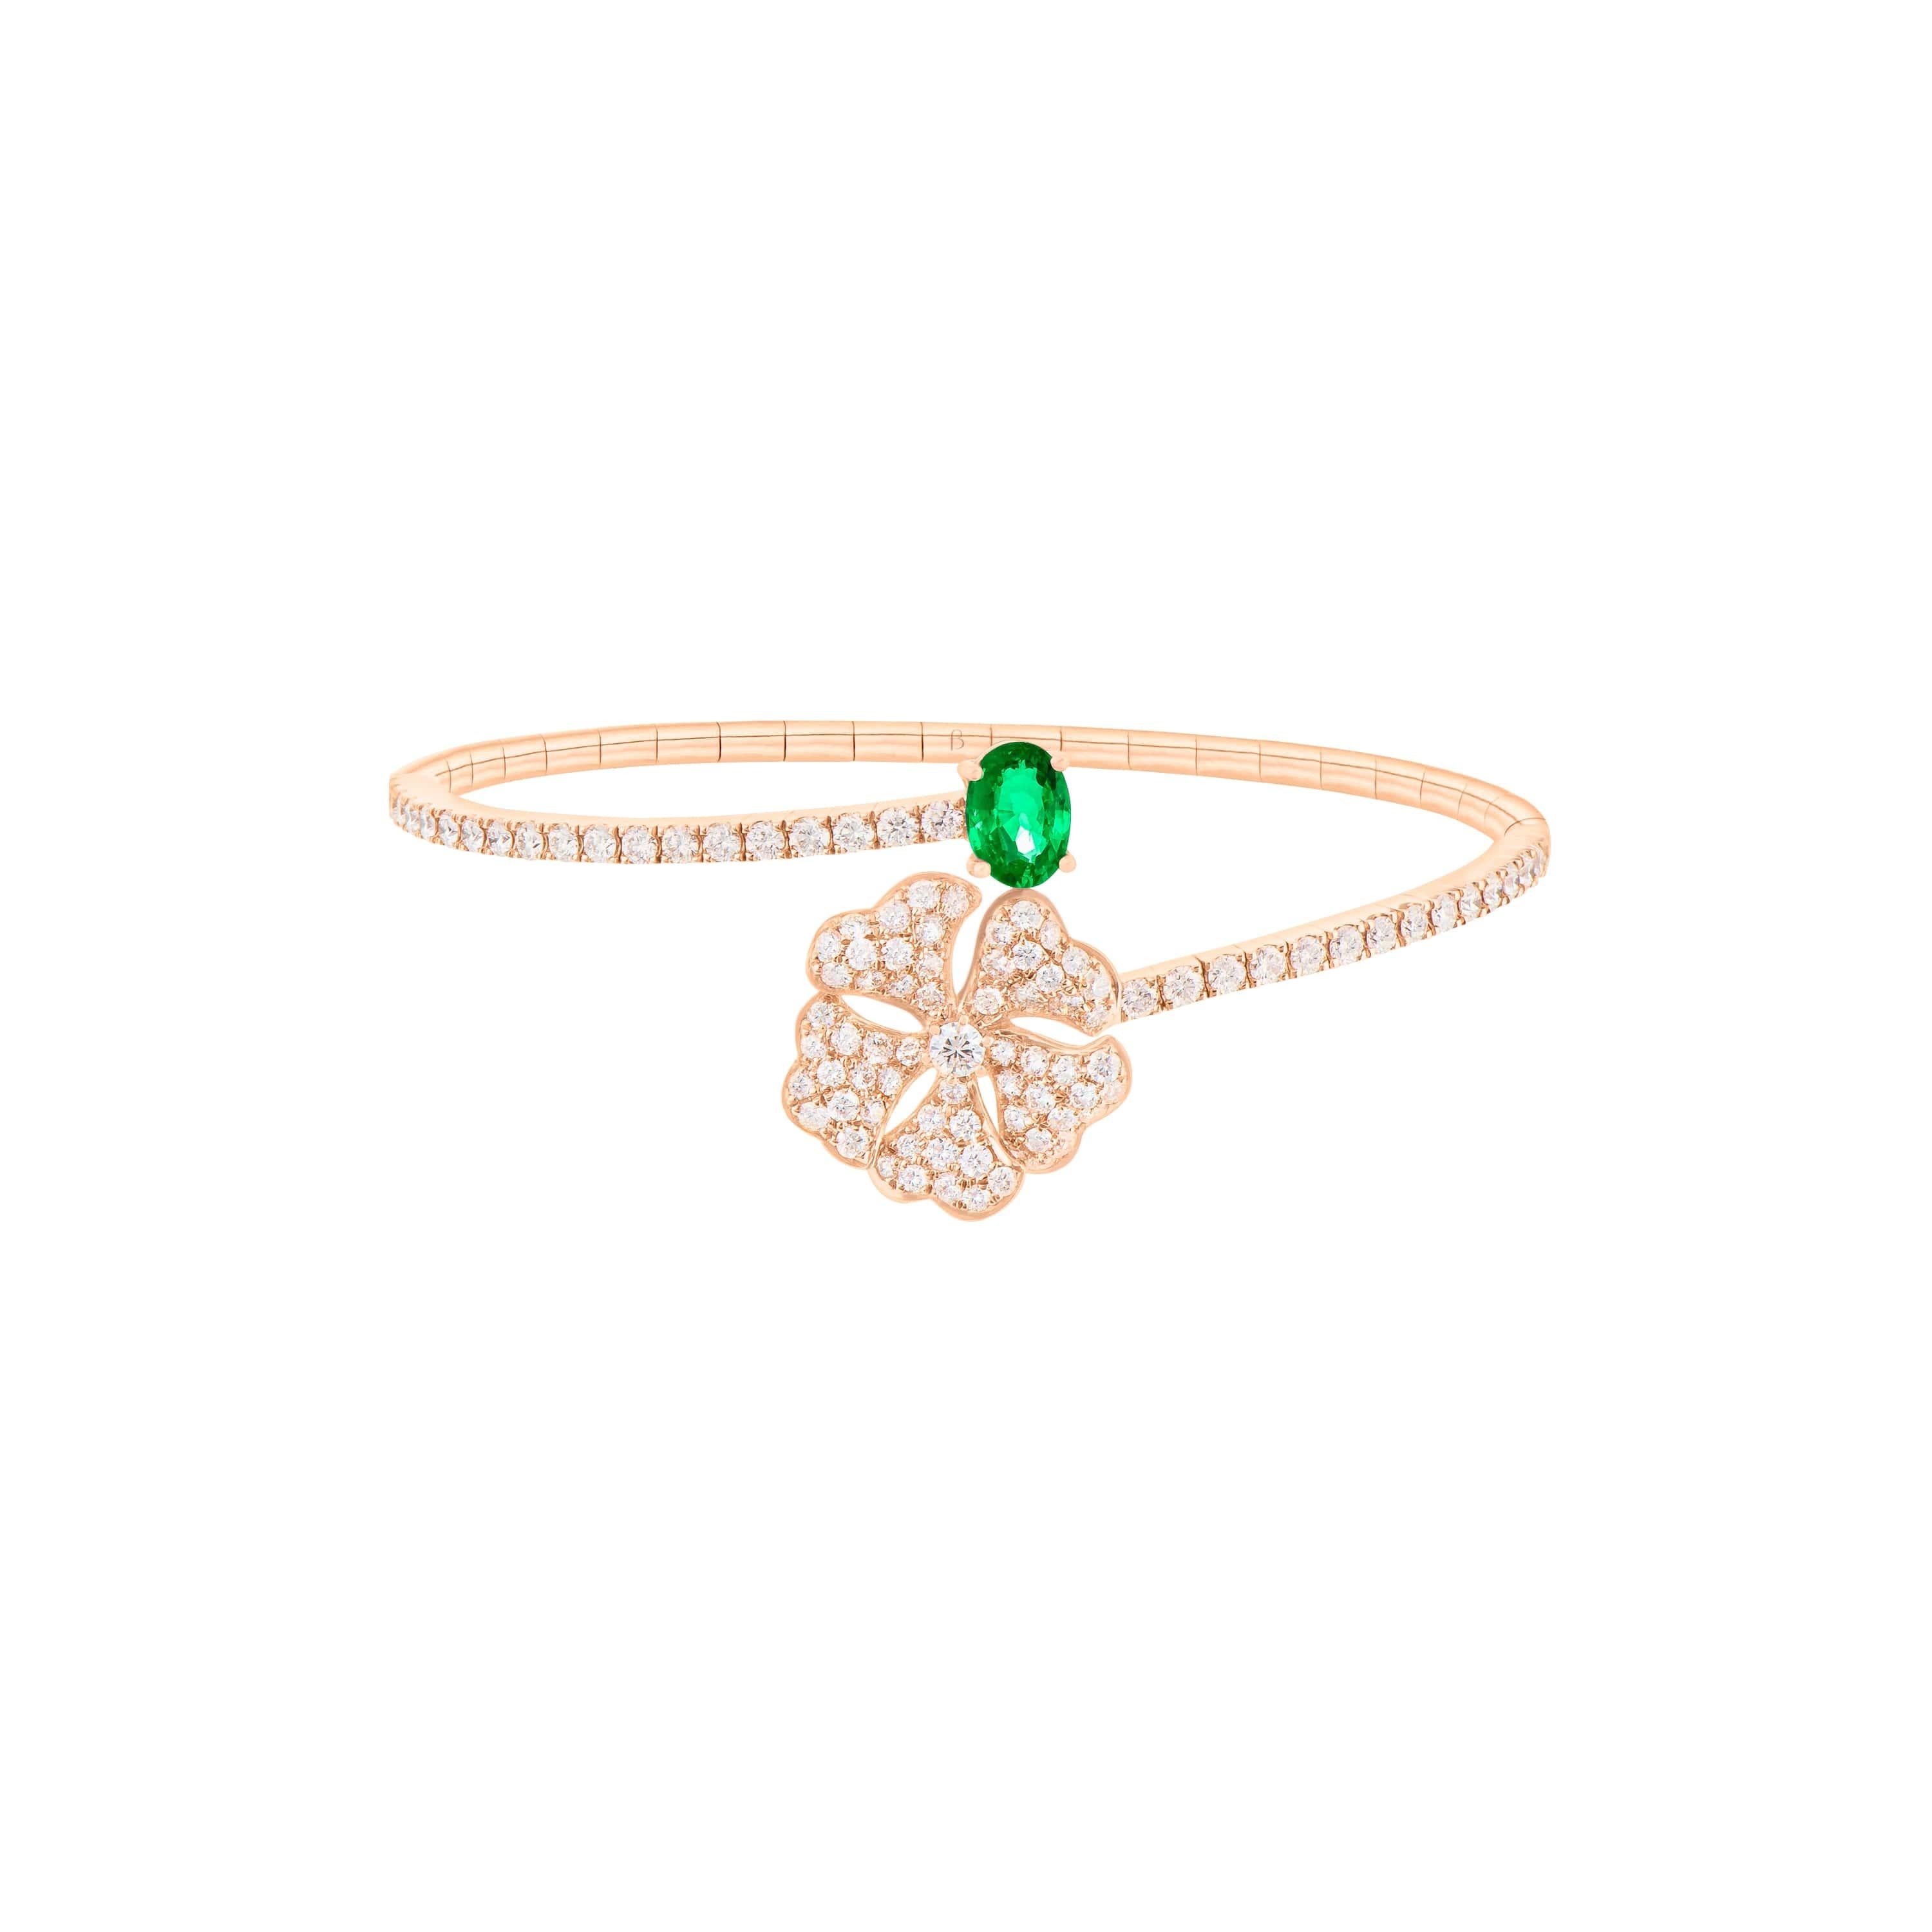 Bloom Emerald and Diamond Open Spiral Bangle in 18K Rose Gold

Inspired by the exquisite petals of the alpine cinquefoil flower, the Bloom collection combines the richness of diamonds and precious metals with the light versatility of this delicate,